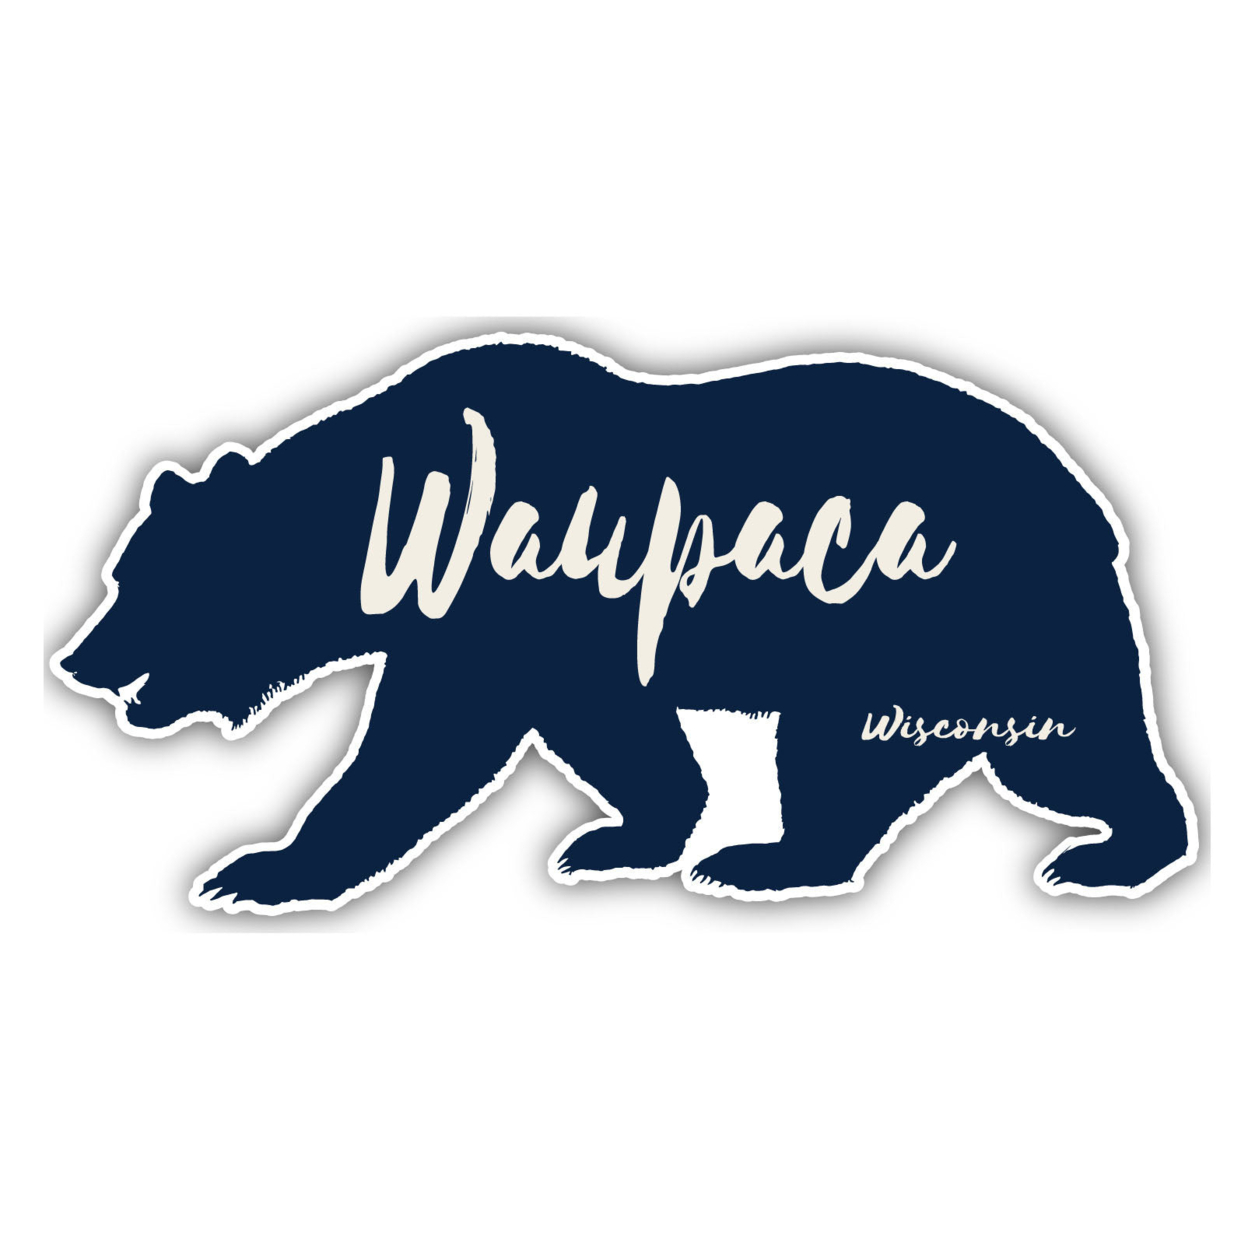 Waupaca Wisconsin Souvenir Decorative Stickers (Choose Theme And Size) - Single Unit, 4-Inch, Great Outdoors